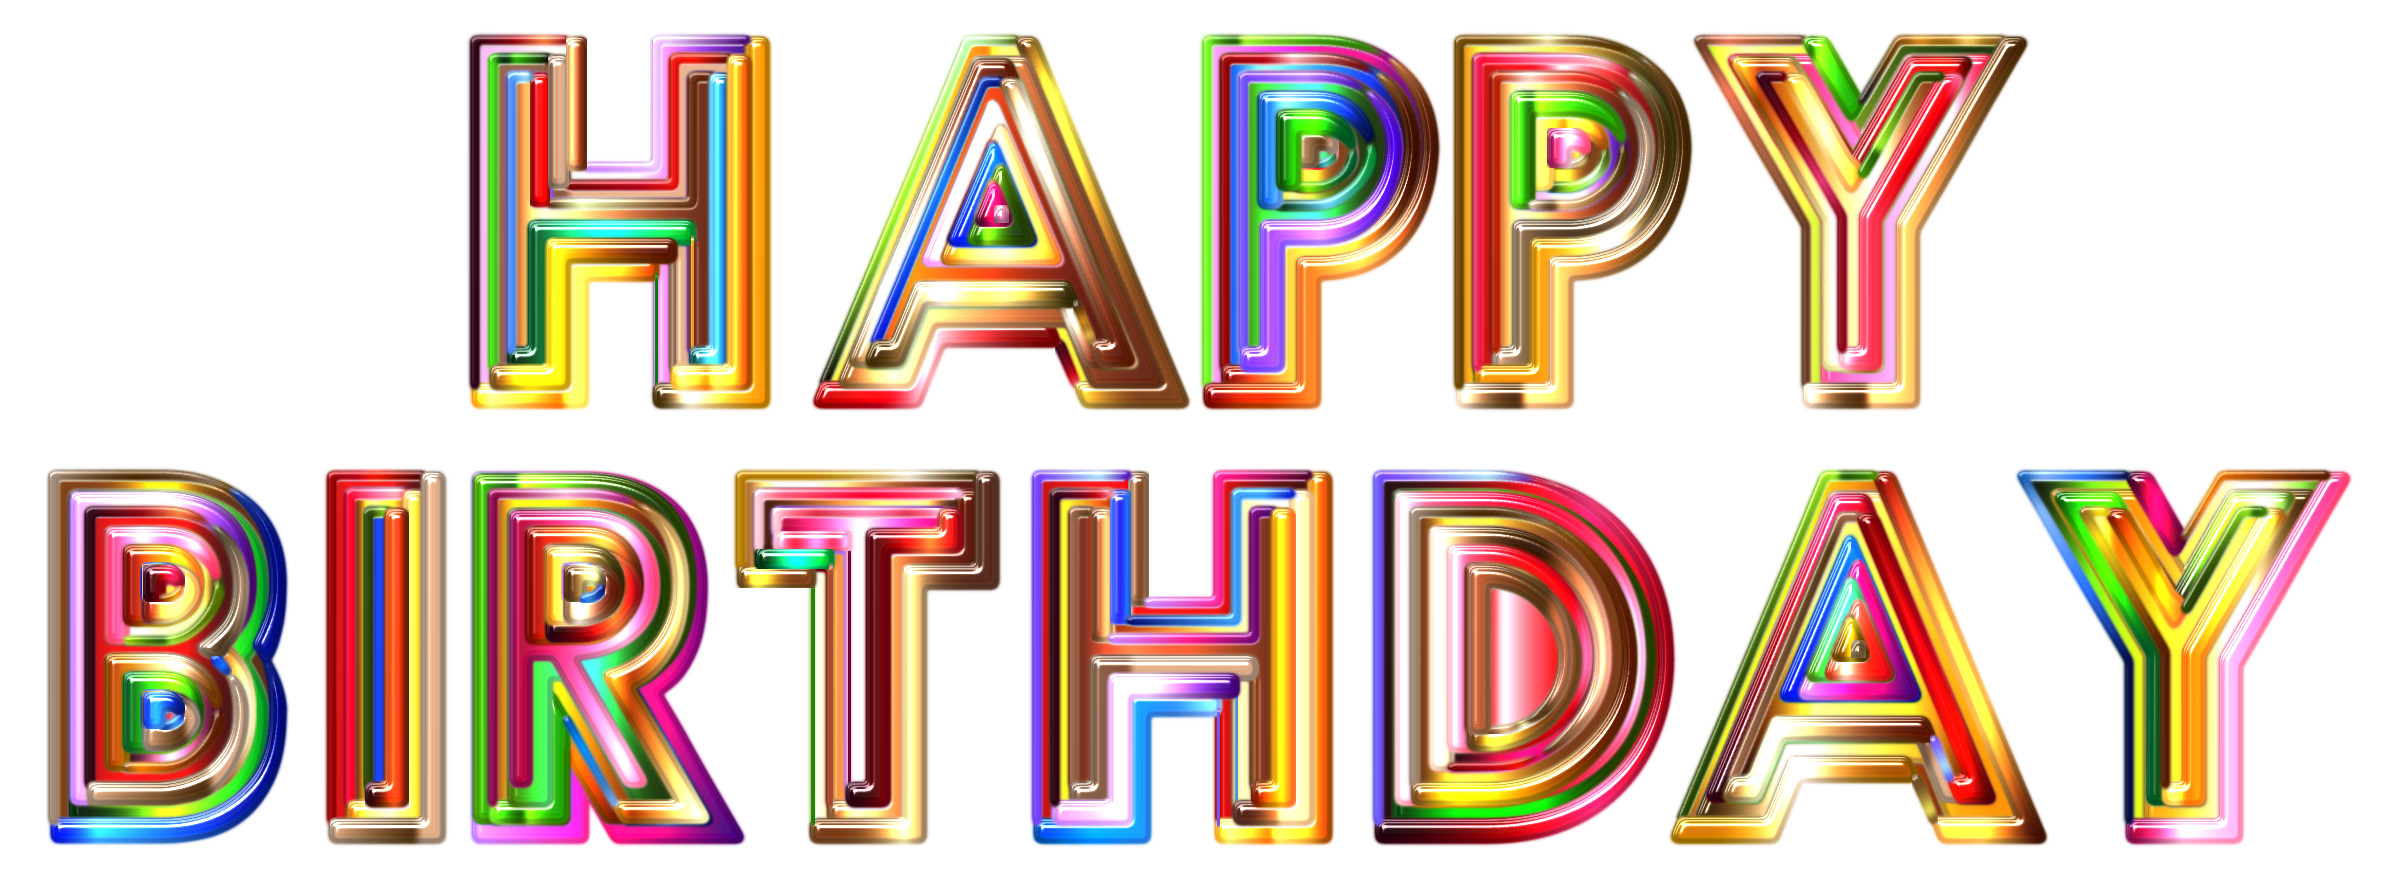 happy birthday background png images